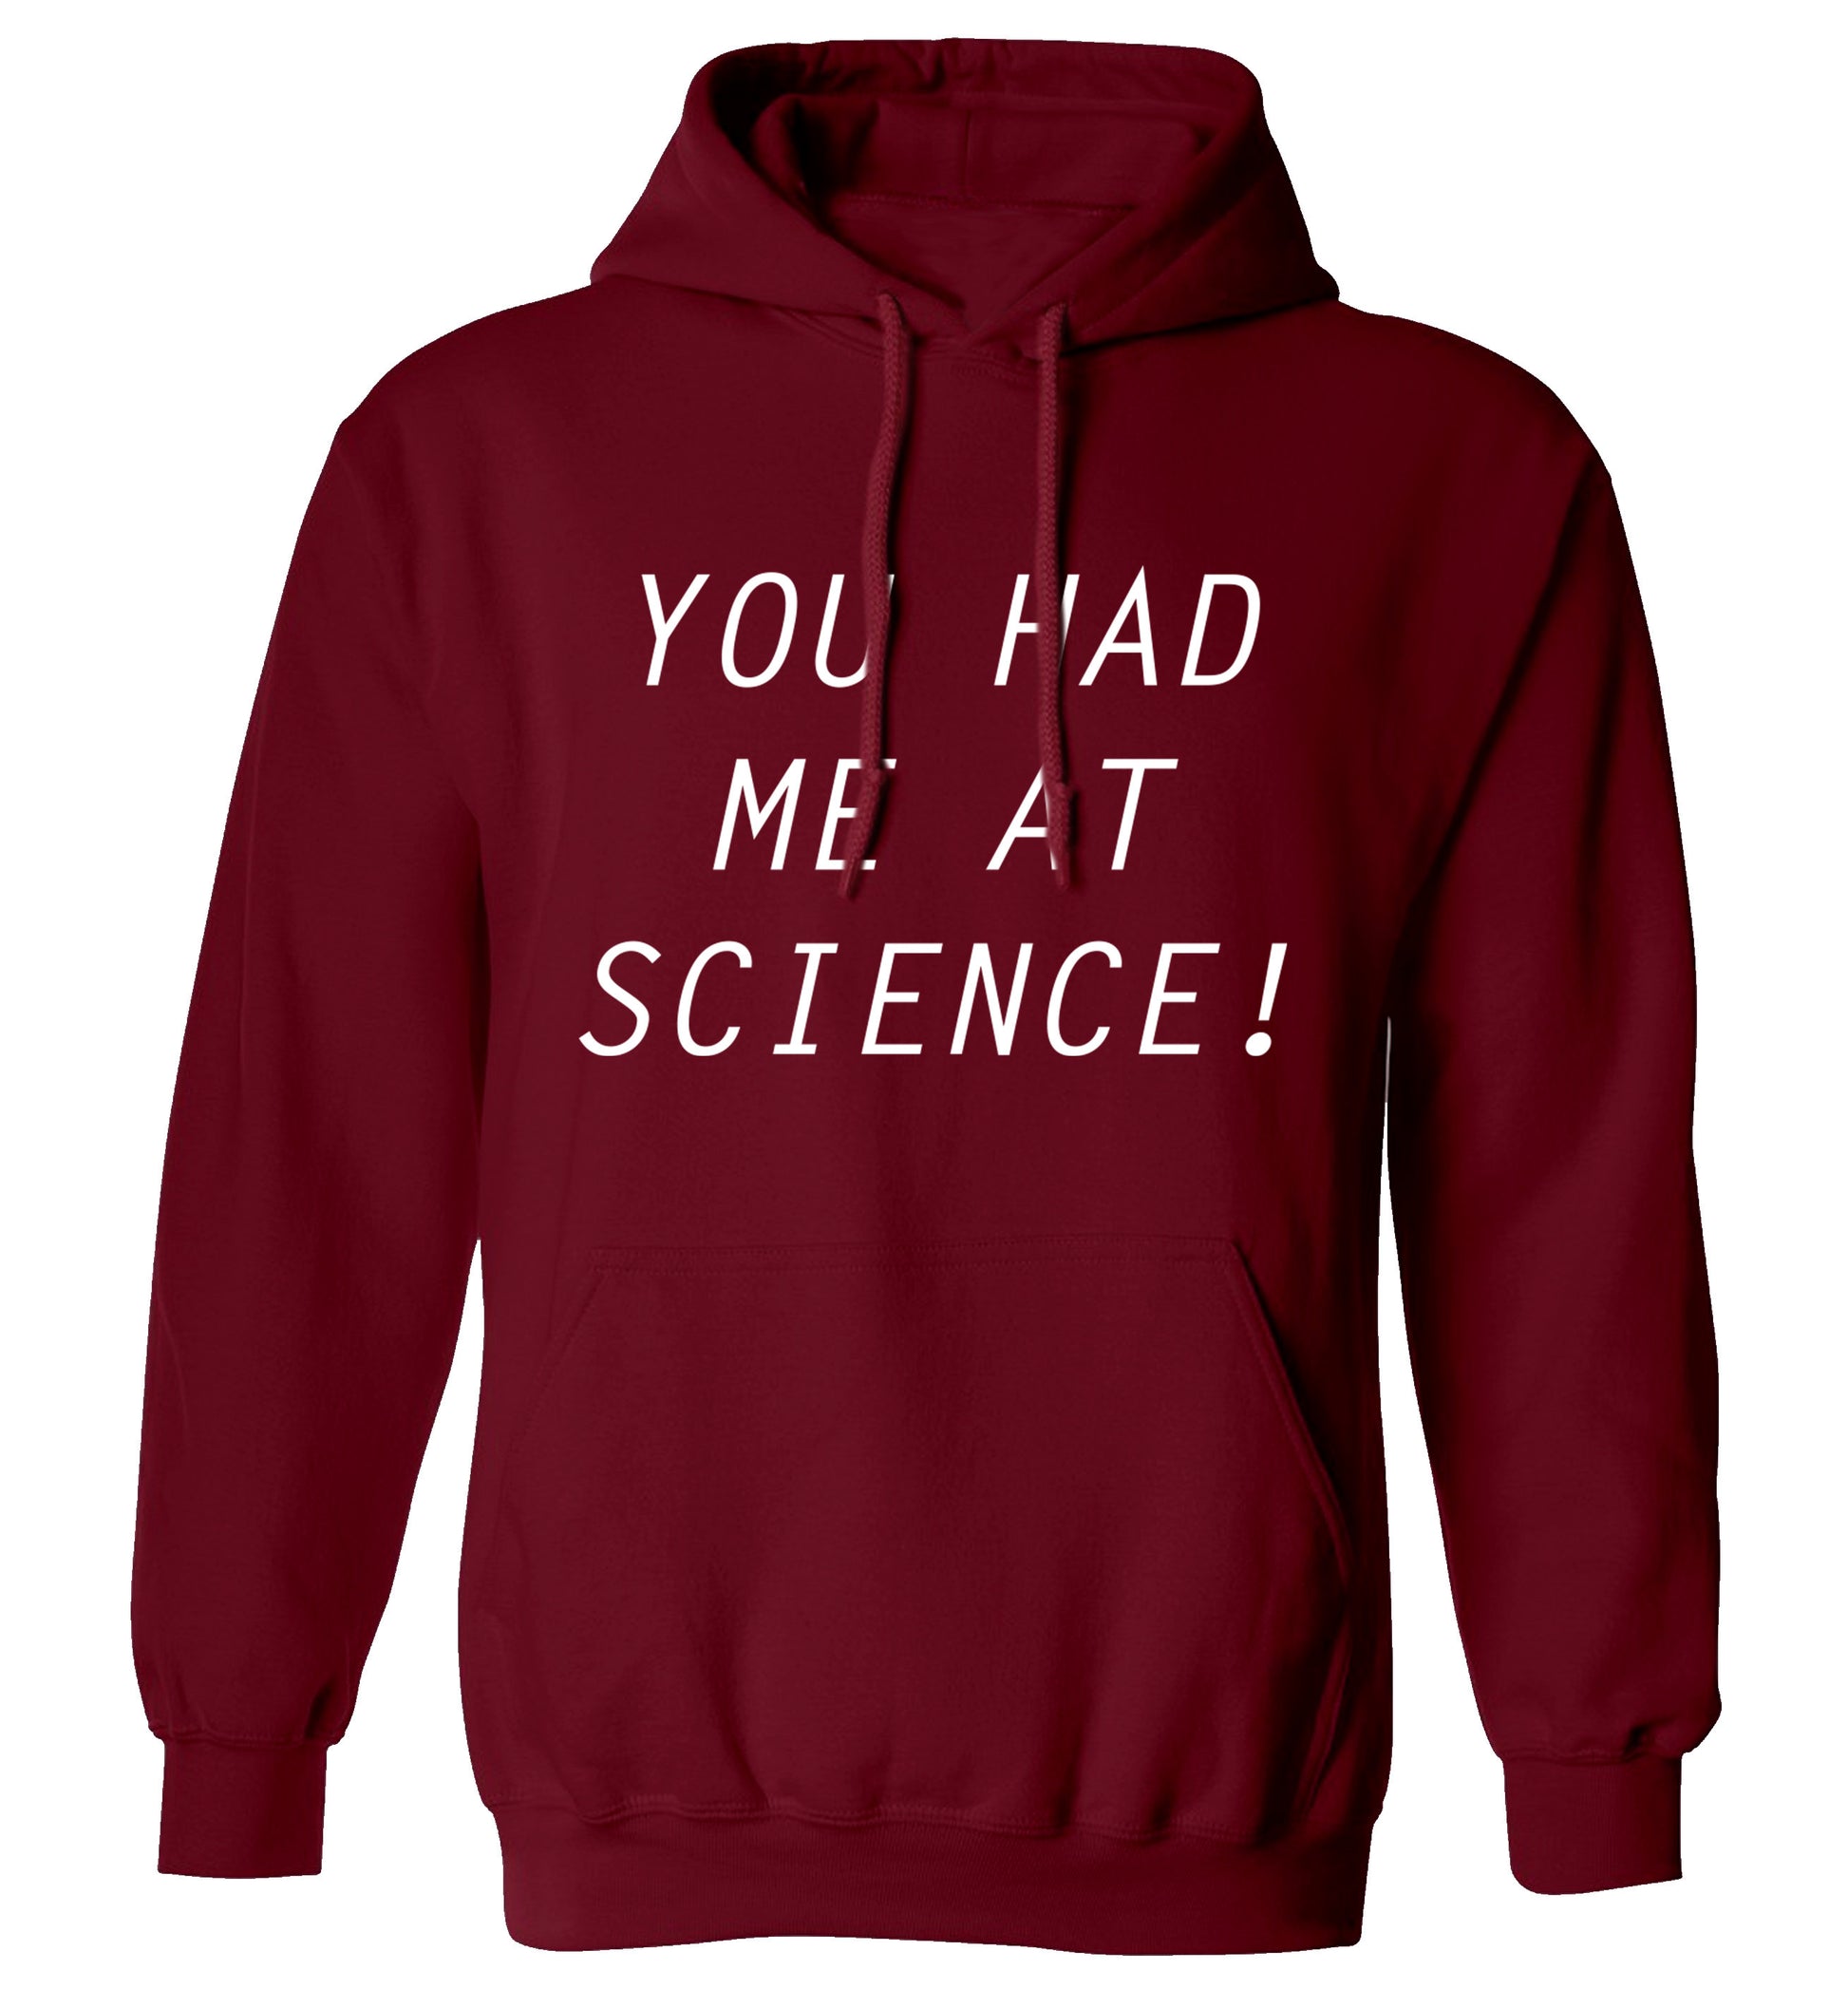 You had me at science adults unisex maroon hoodie 2XL